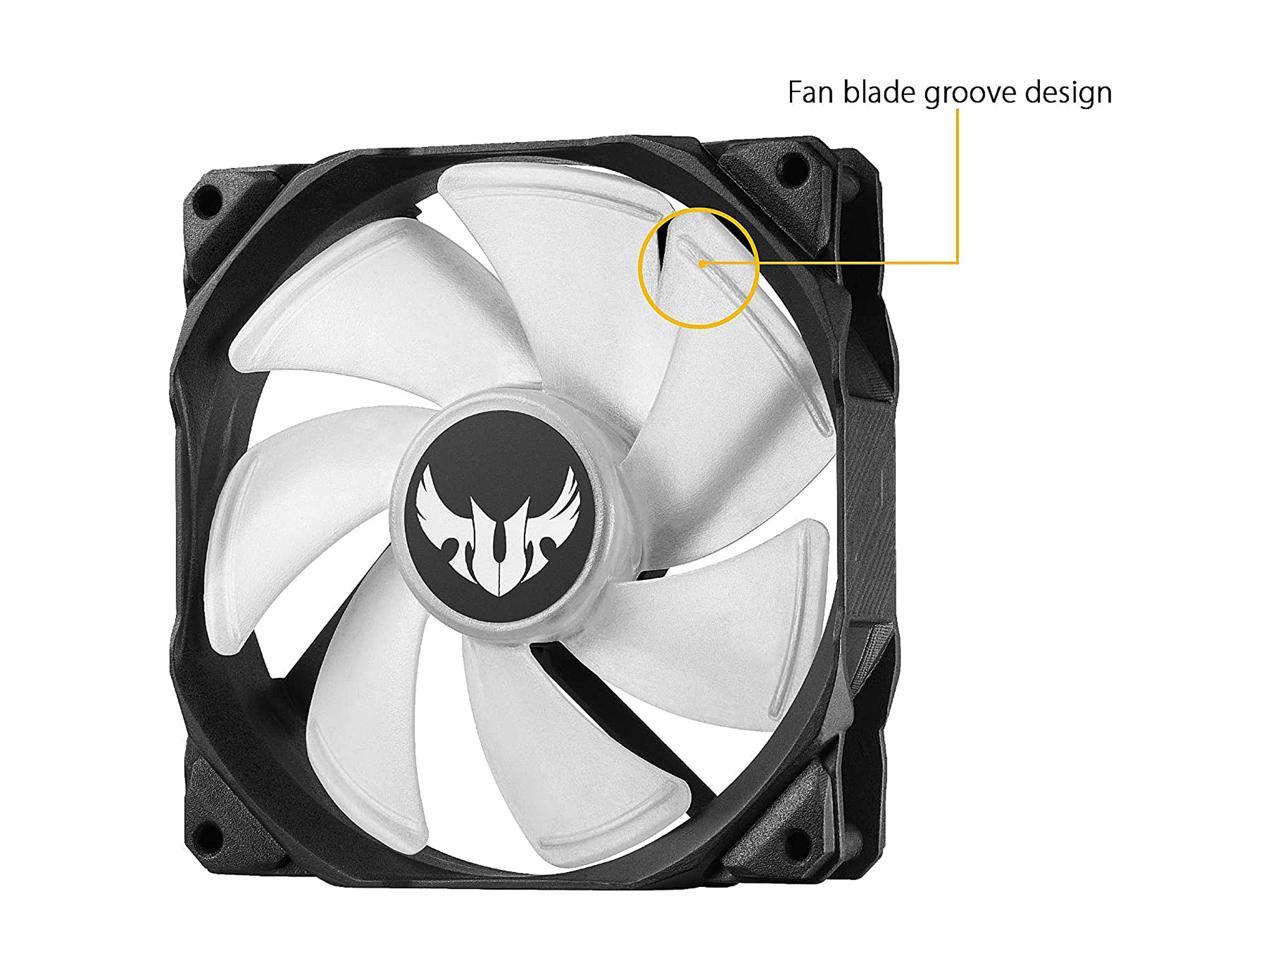 ASUS TUF Gaming LC 240 RGB All-in-one Liquid CPU Cooler, Aura Sync, TUF 120mm RGB Radiator Fans with Fan Blade Groove Design